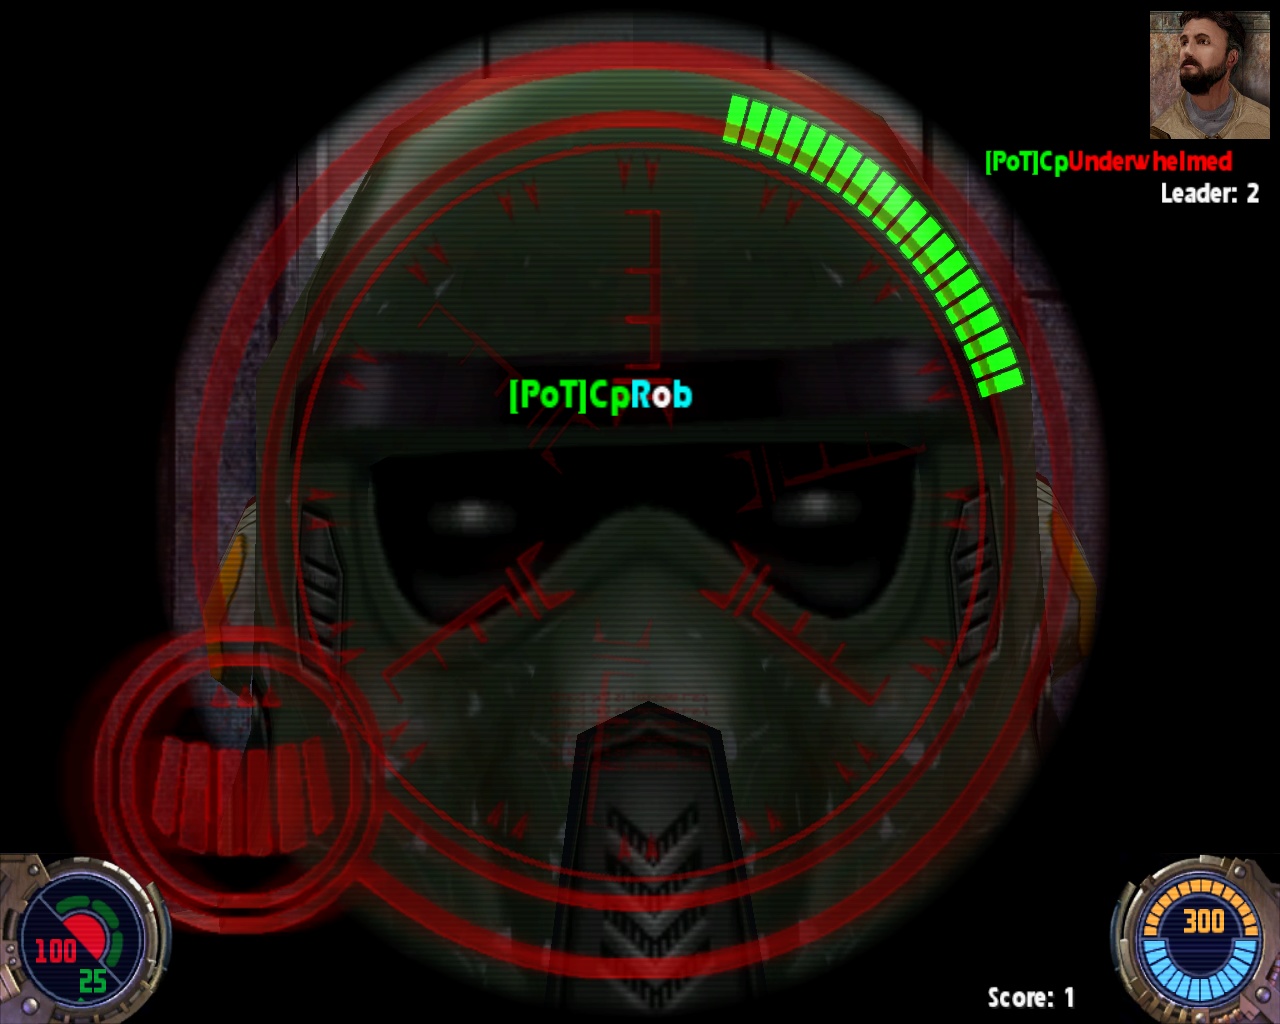 Looking downscope of a sniper rifle in Jedi Outcast 2 zoomed in hilariously right on a friend&#039;s avatar's face.